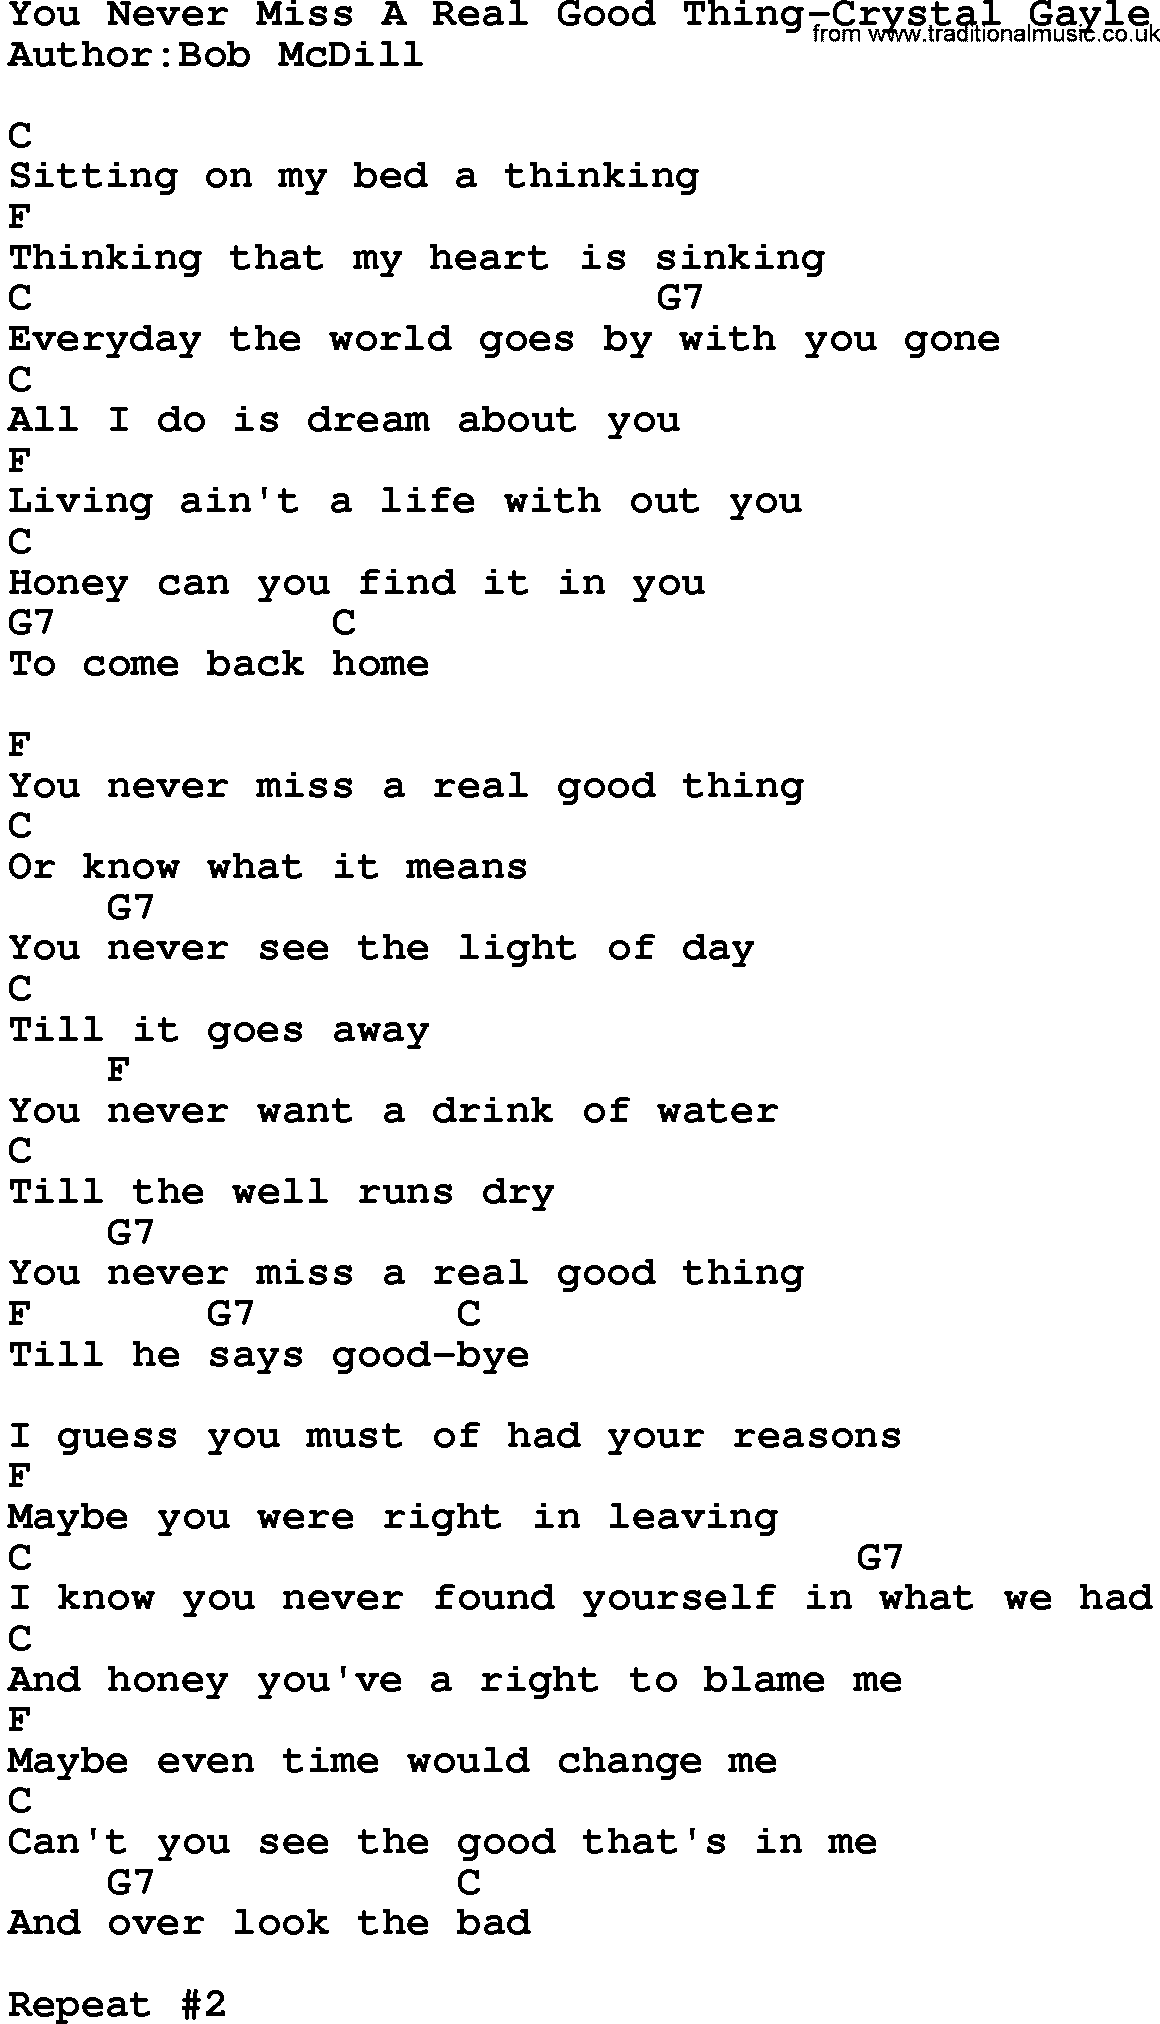 Country music song: You Never Miss A Real Good Thing-Crystal Gayle lyrics and chords